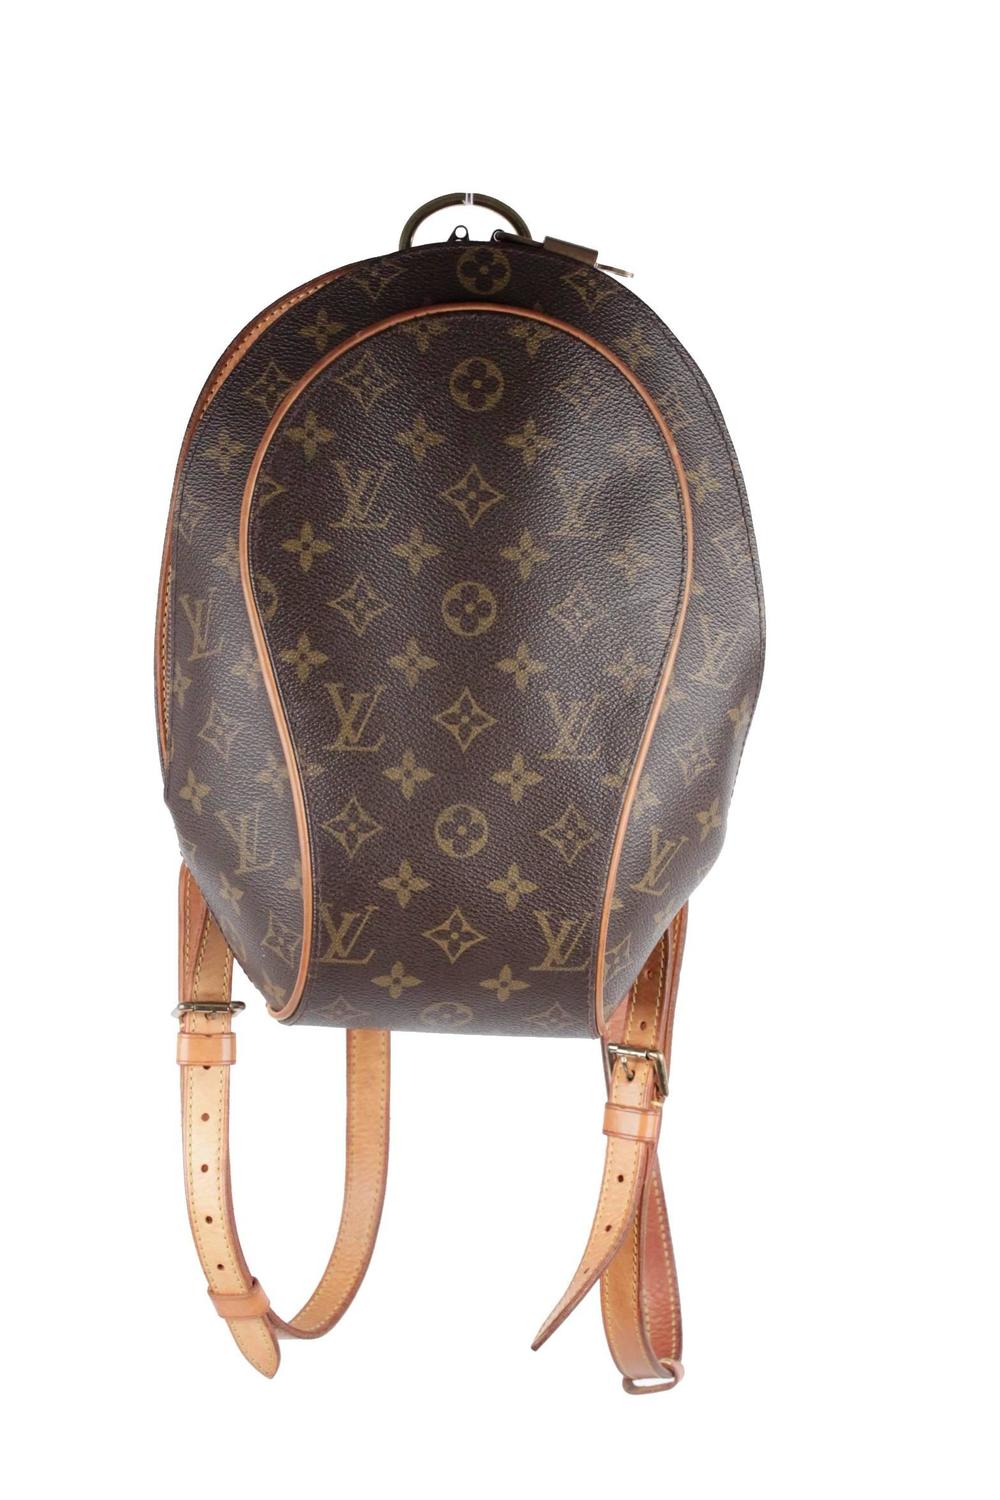 Louis Vuitton Shoulder Bag For Sale | Confederated Tribes of the Umatilla Indian Reservation